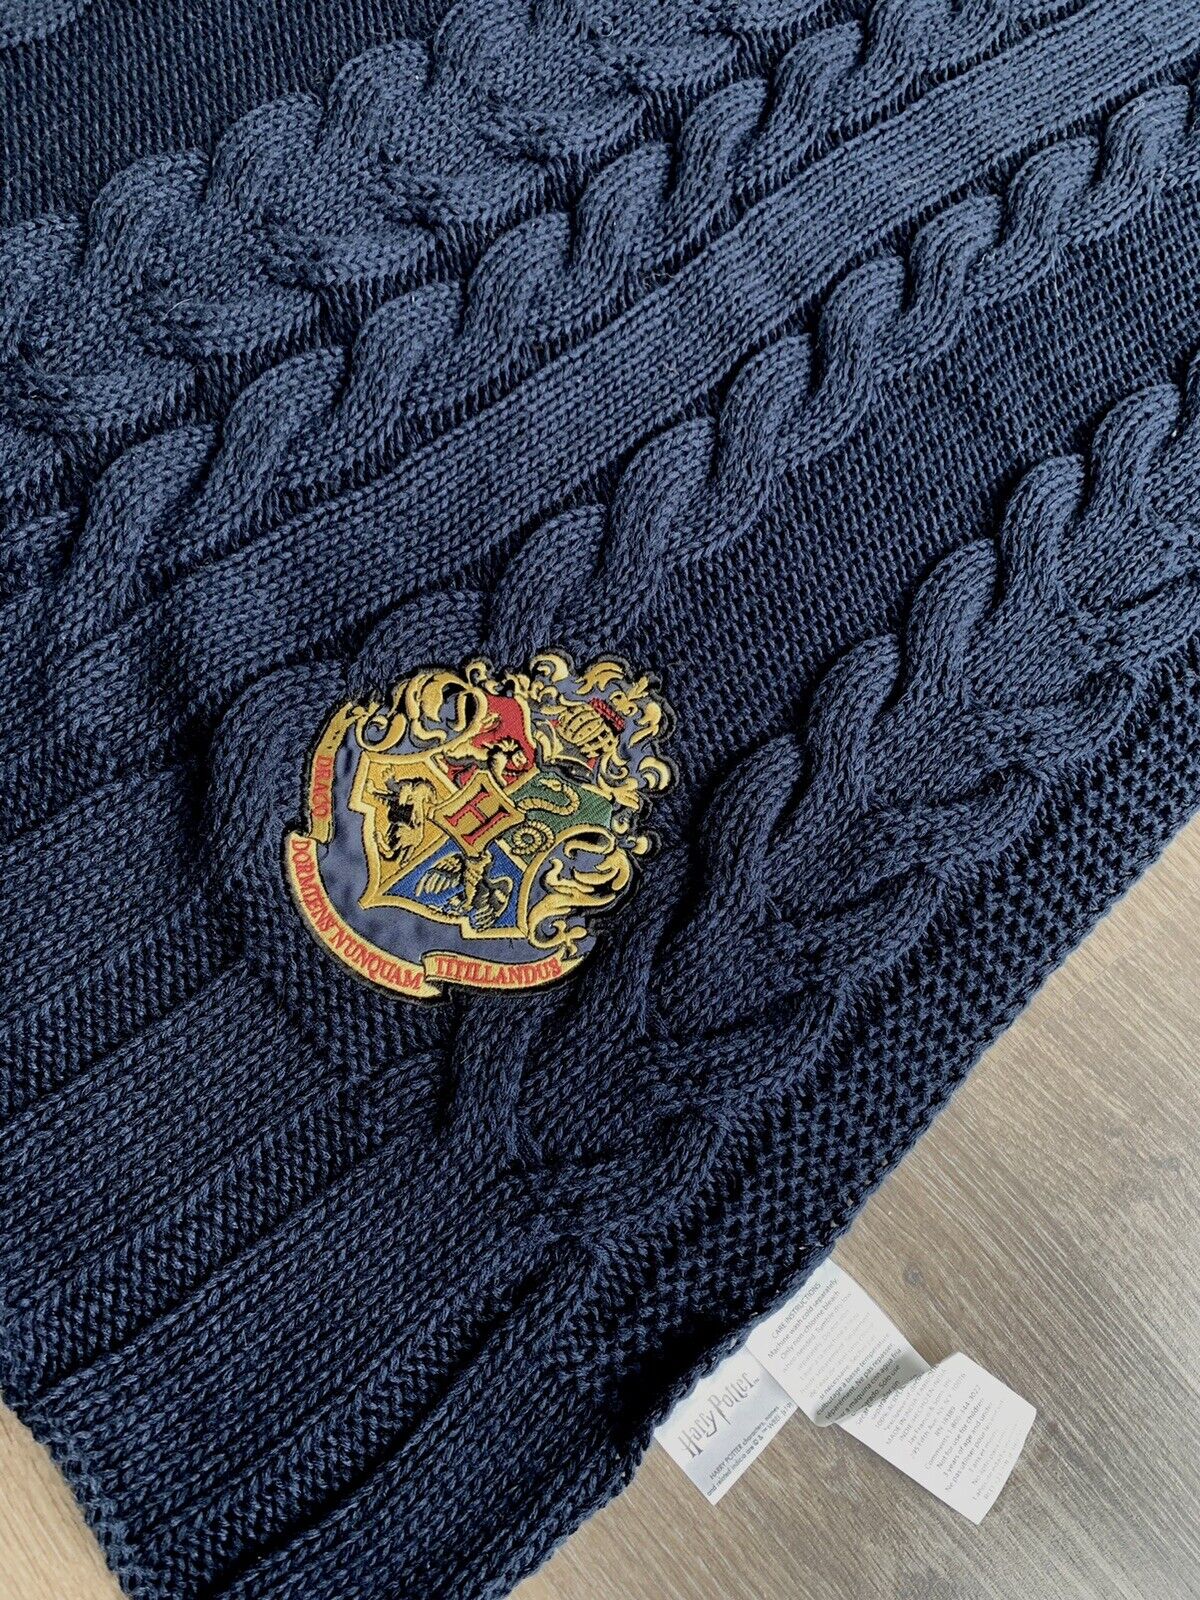 Warner Brothers HARRY POTTER Cable Knit Throw Blanket Navy Blue   54” x 92”